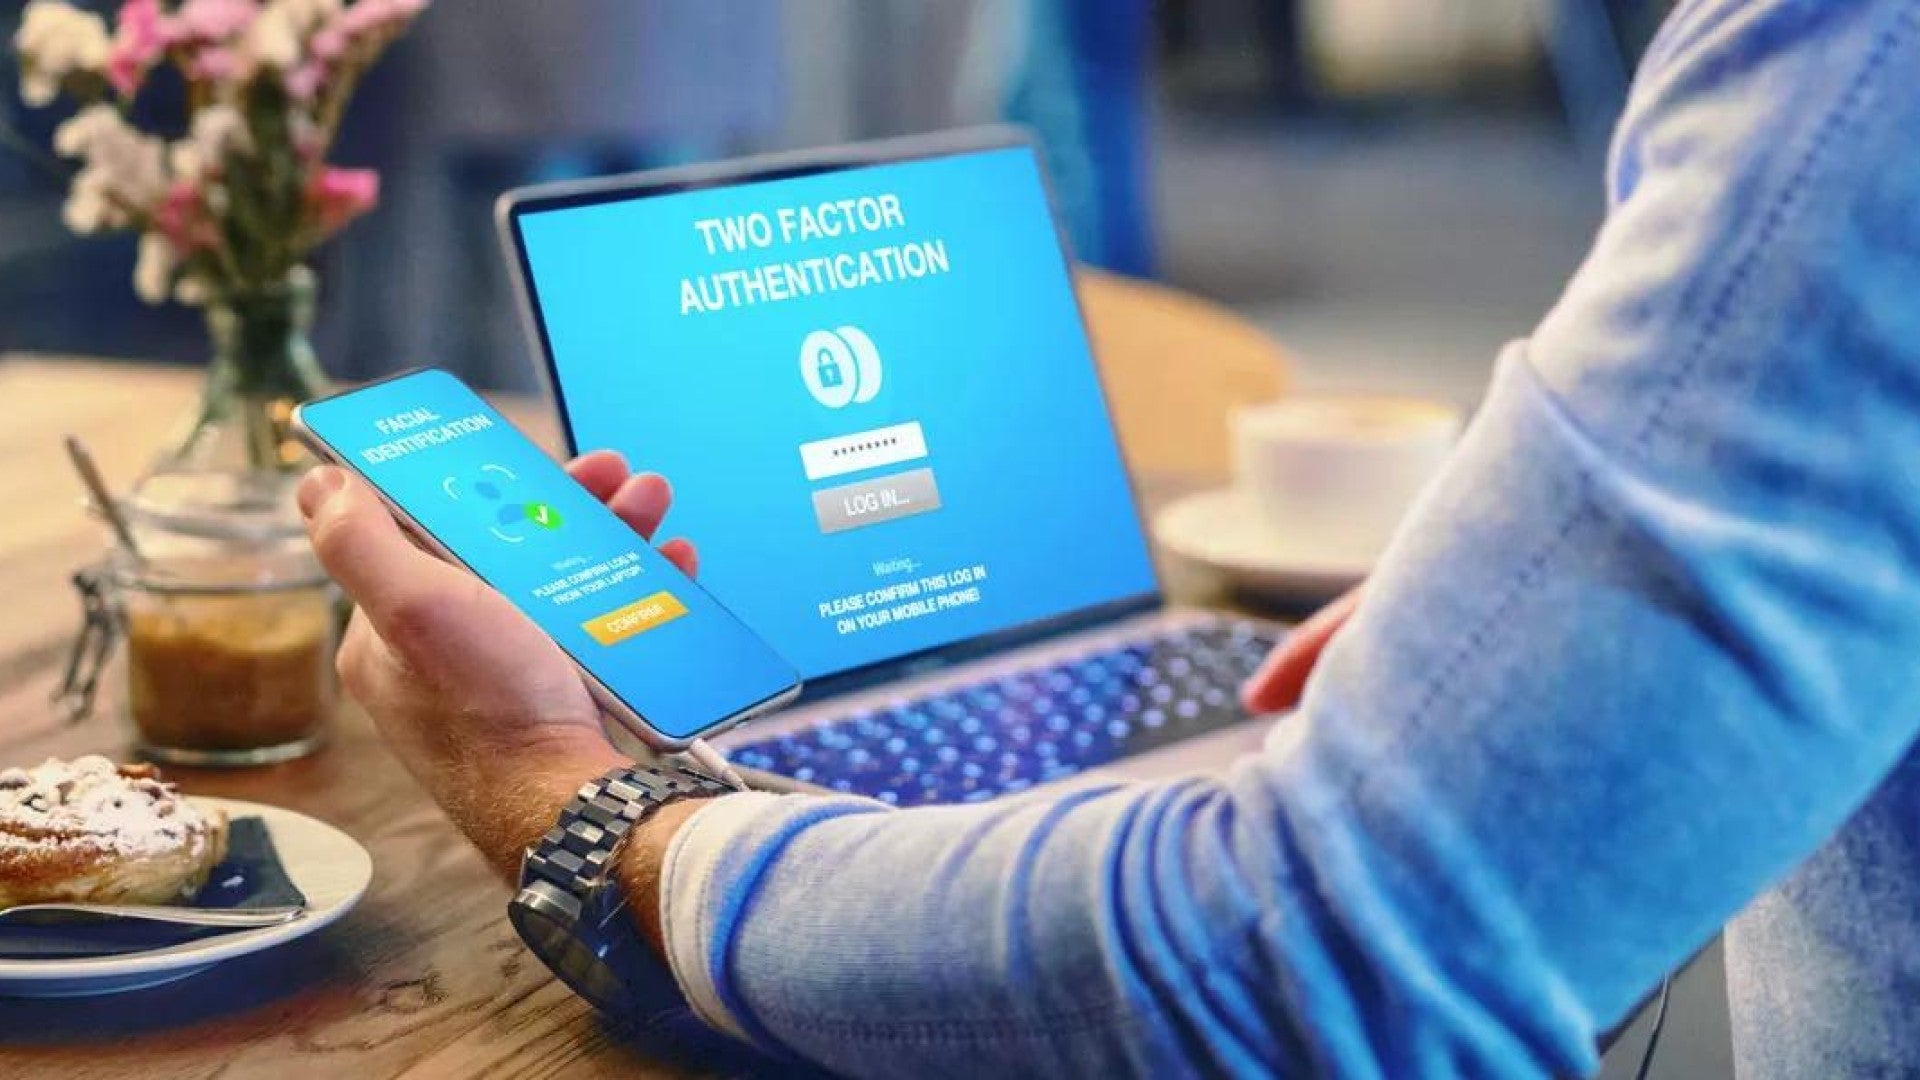 Person logging into a laptop using a two-factor authentication app.